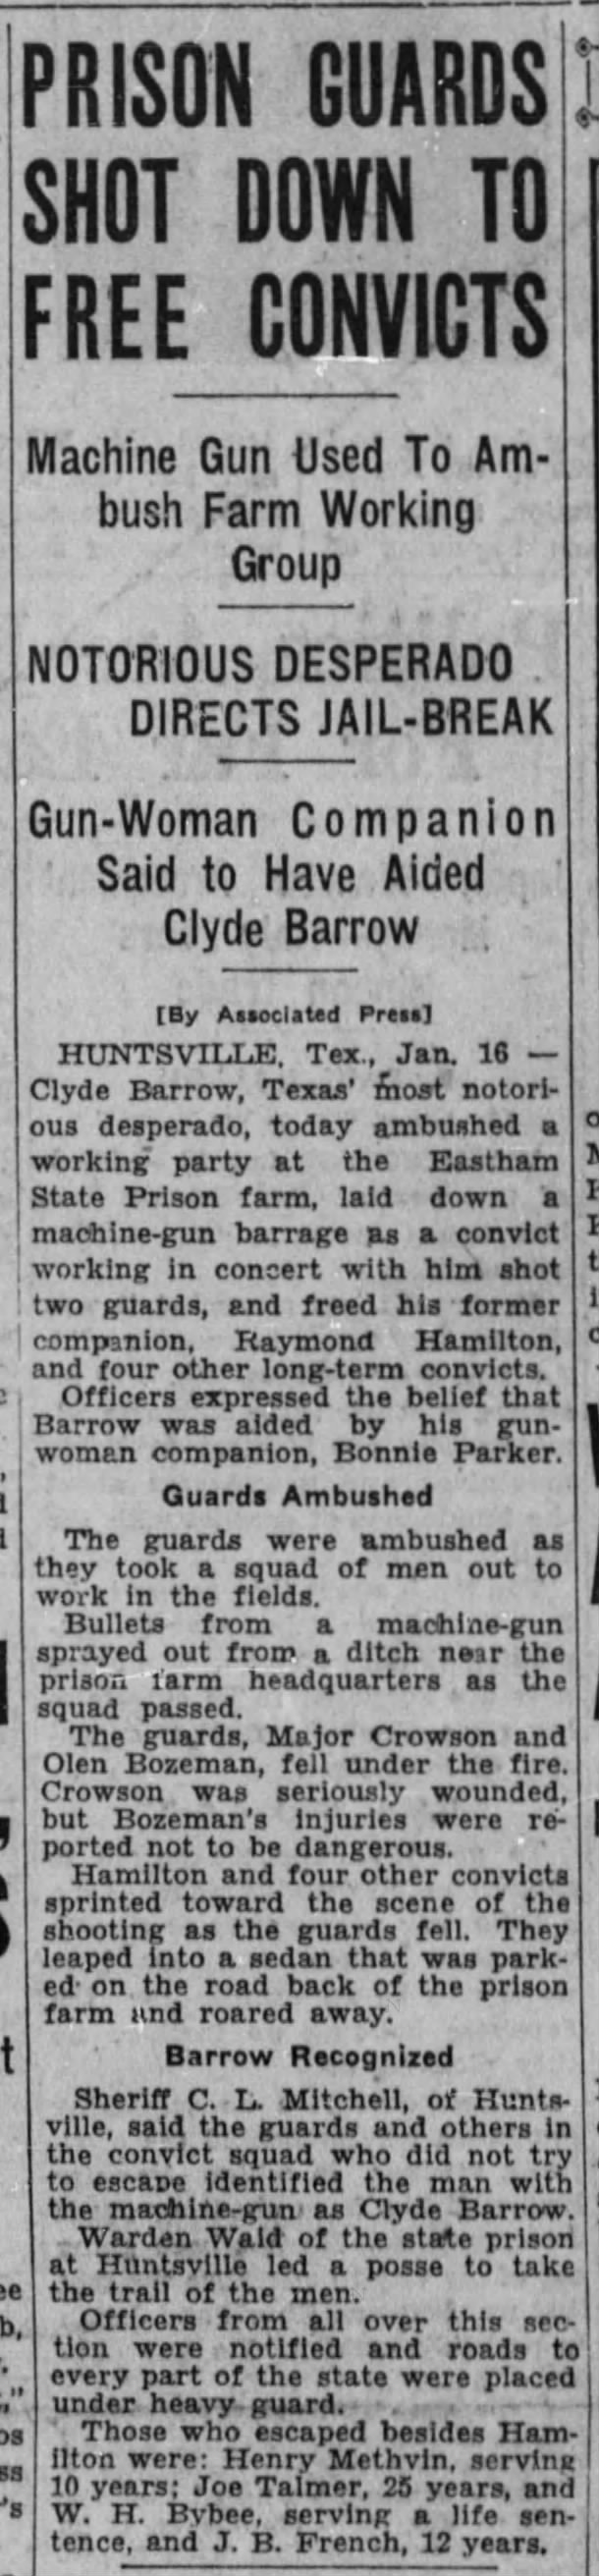 Account of Clyde Barrow's involvement in the Eastham Prison Farm breakout